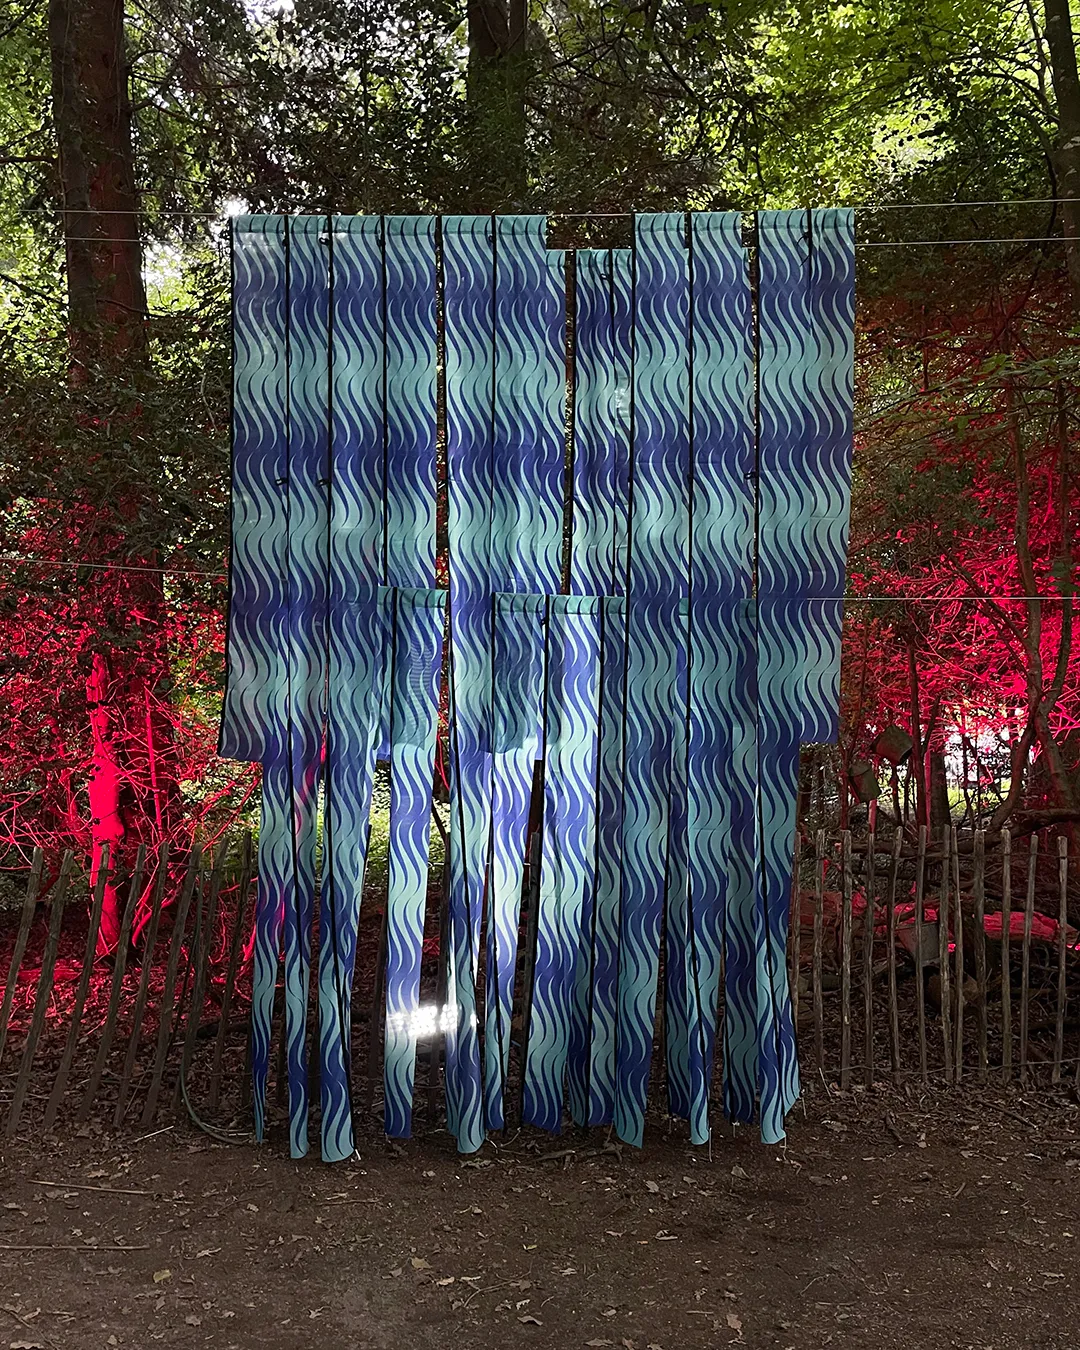 A sculpture in a forest. It is made of long strips of a repeat pattern on flag material. The repeat design is seagreen and ultramarine blue waves. It is dark and the sculpture is backlit with lights.